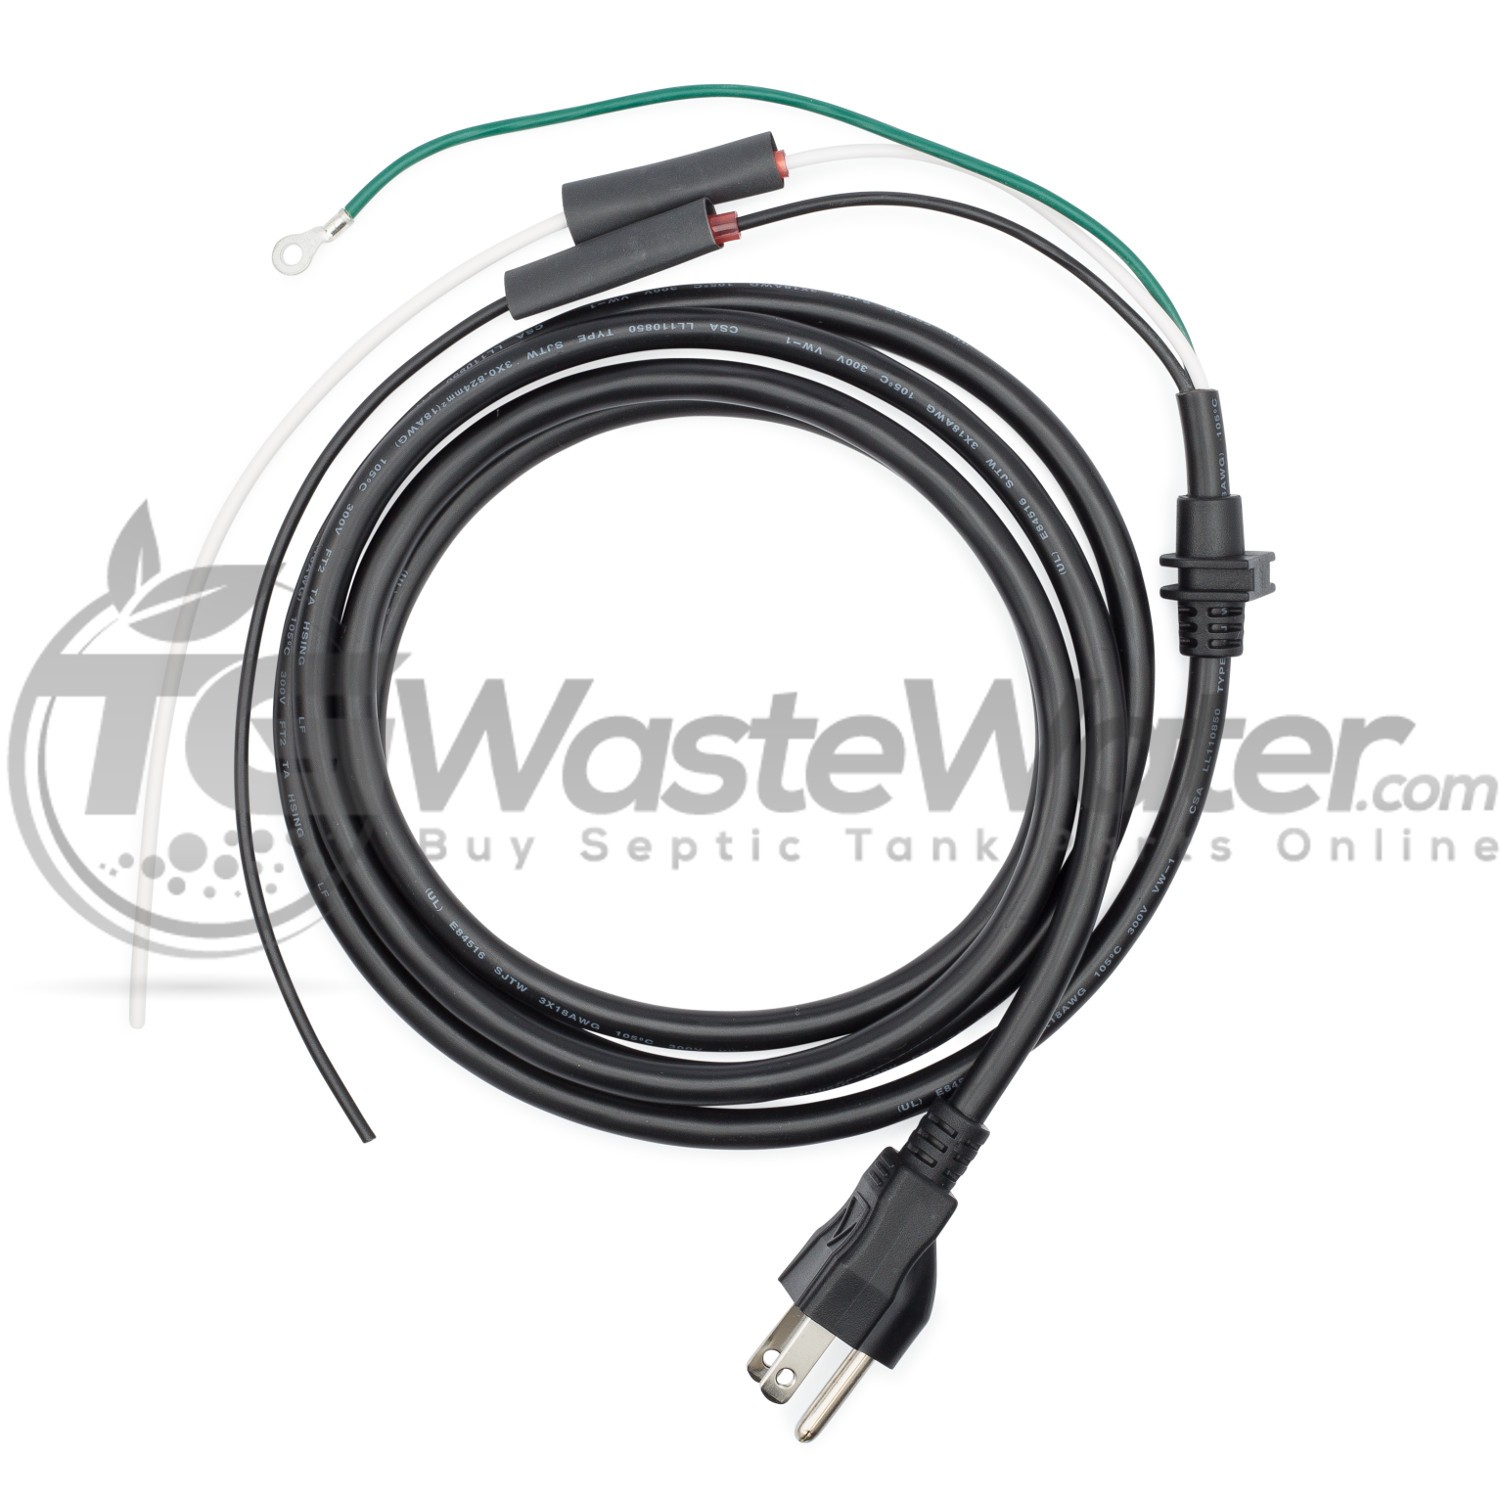 Hiblow HP-100 and HP-120 Replacement Power Cord